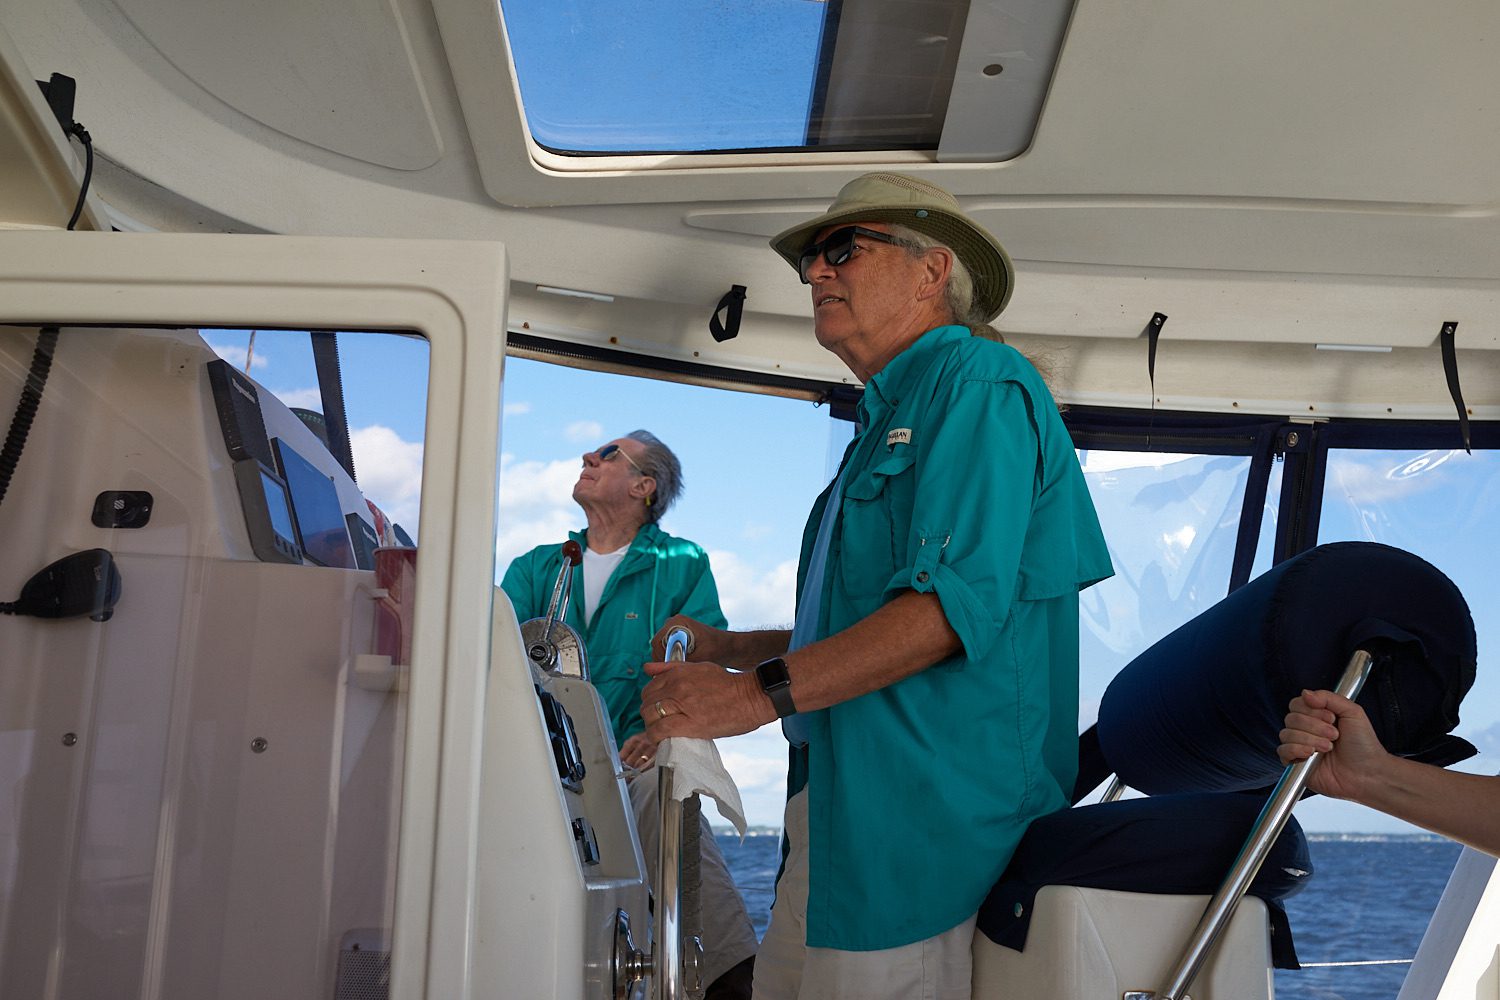 Two men in green shirts and hats on a boat.